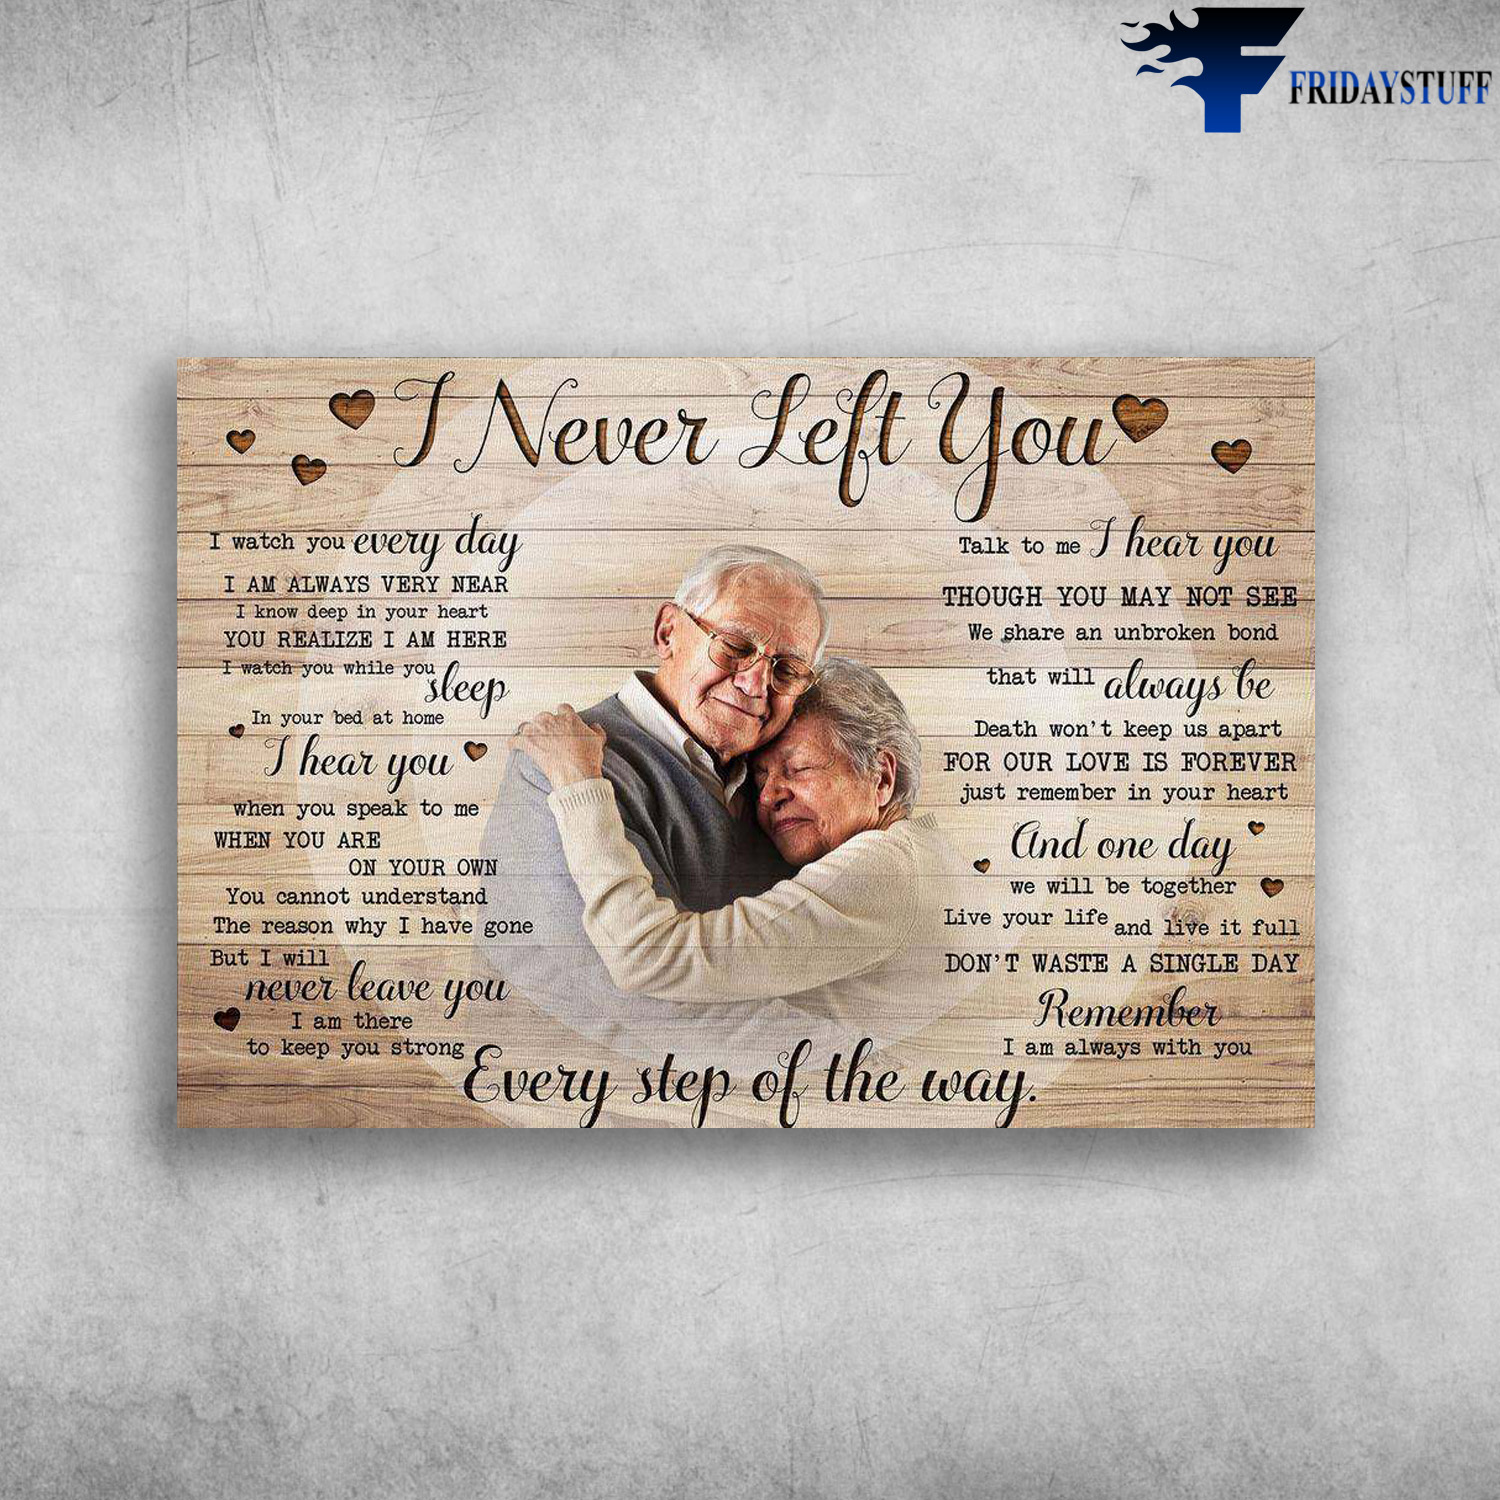 Old Couple - I Never Left You, I Watch You Everyday, I Am Always Every Near, I Know Deep In Your Heart, You Realize I Am Here, I Watch You While You Sleep, In Your Bed At Home, I Hear You When You Speak To Me